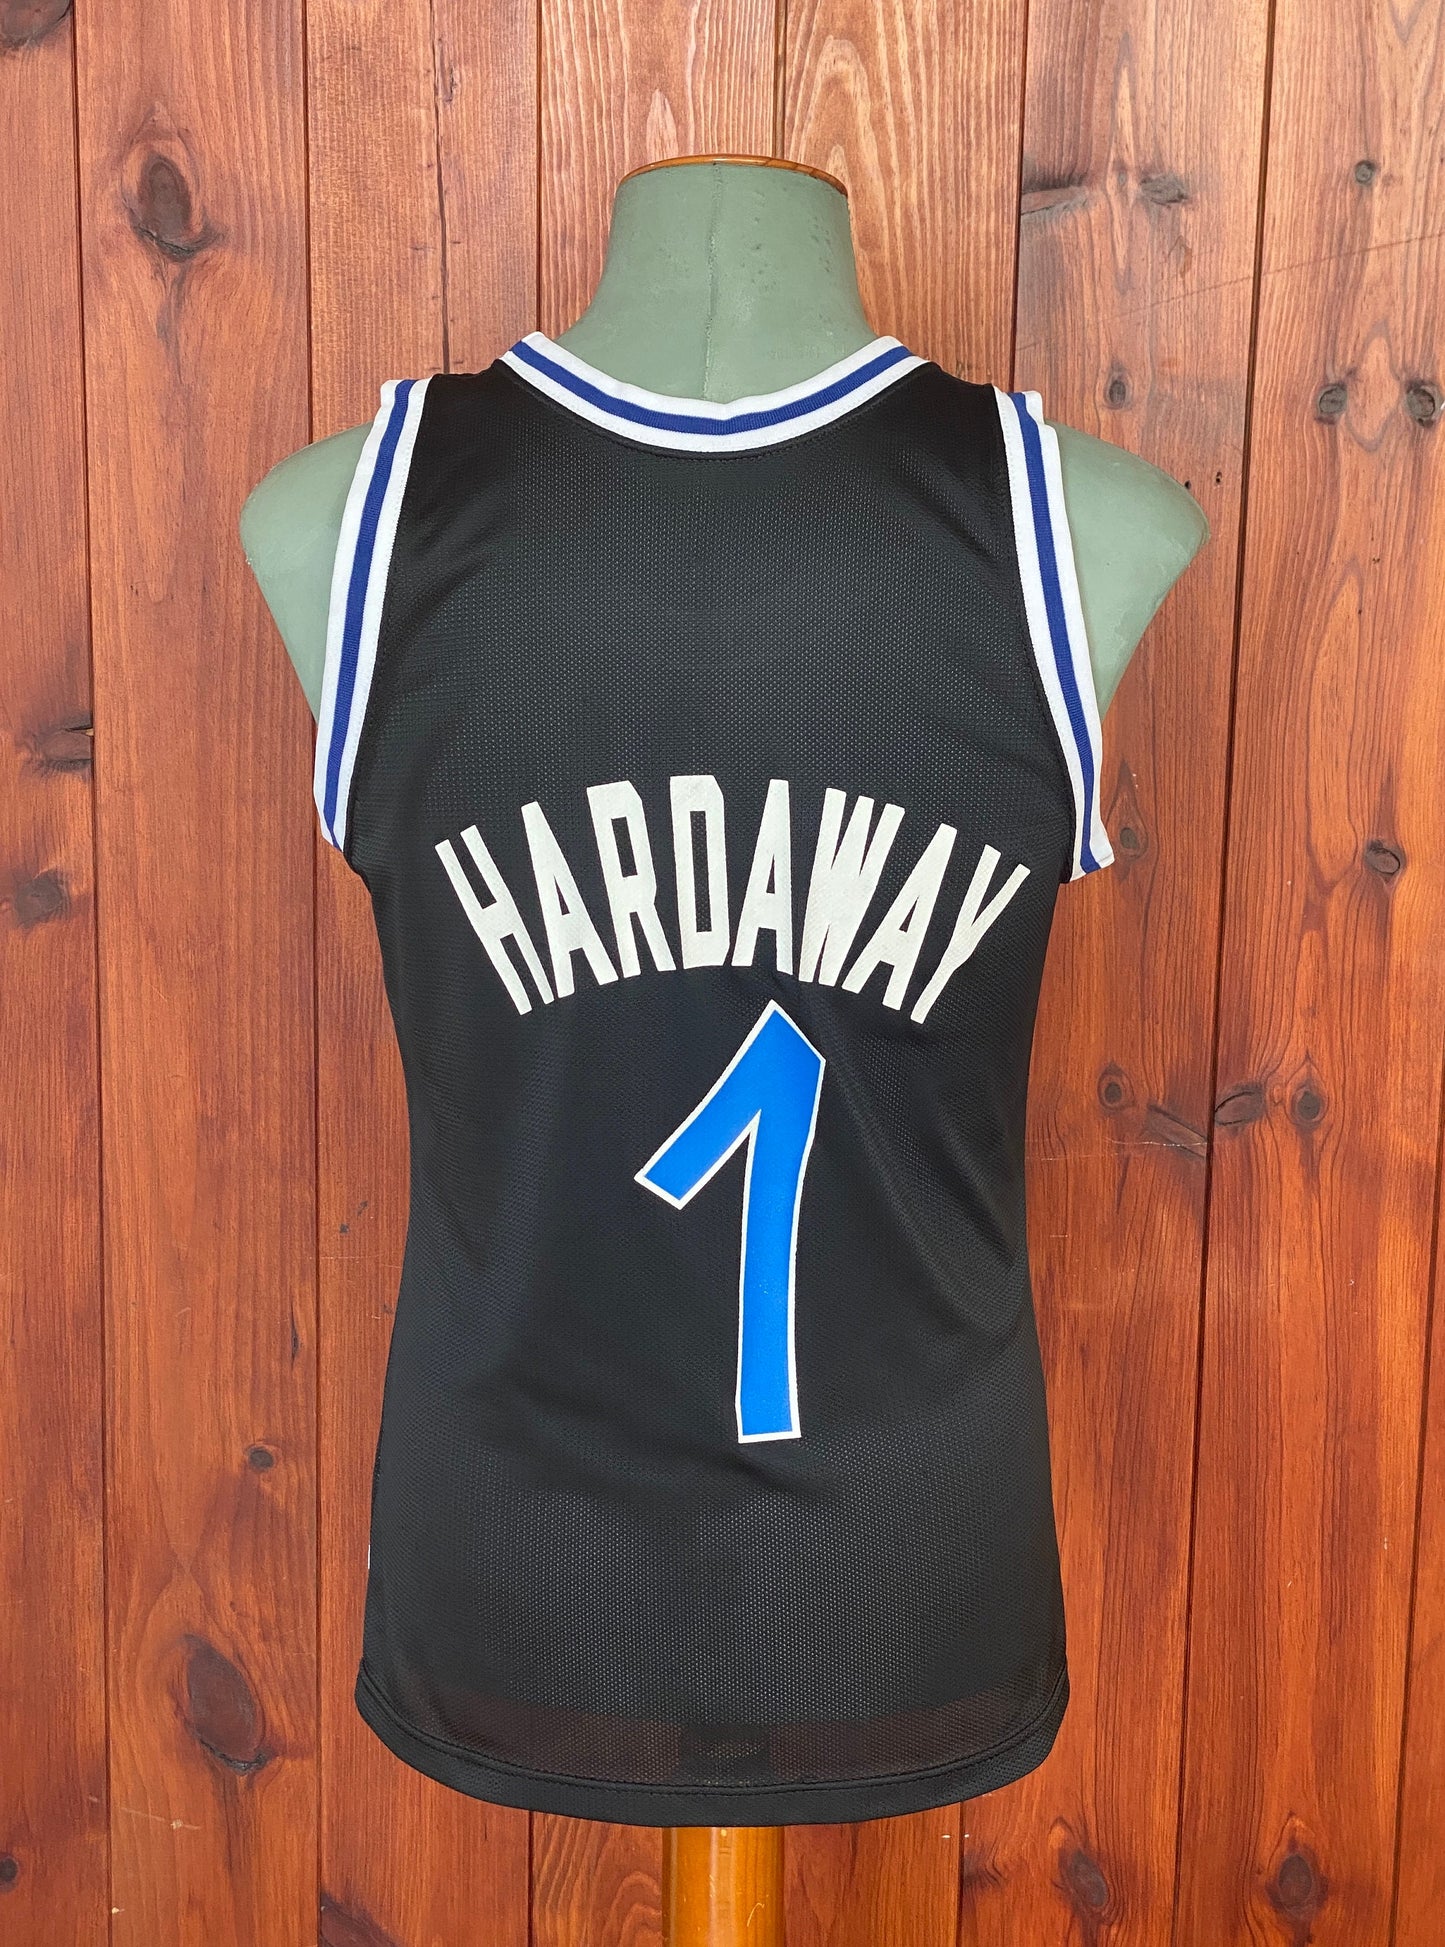 Vintage 90s Orlando Champion NBA jersey with player Hardaway #01, size 48 - front view.